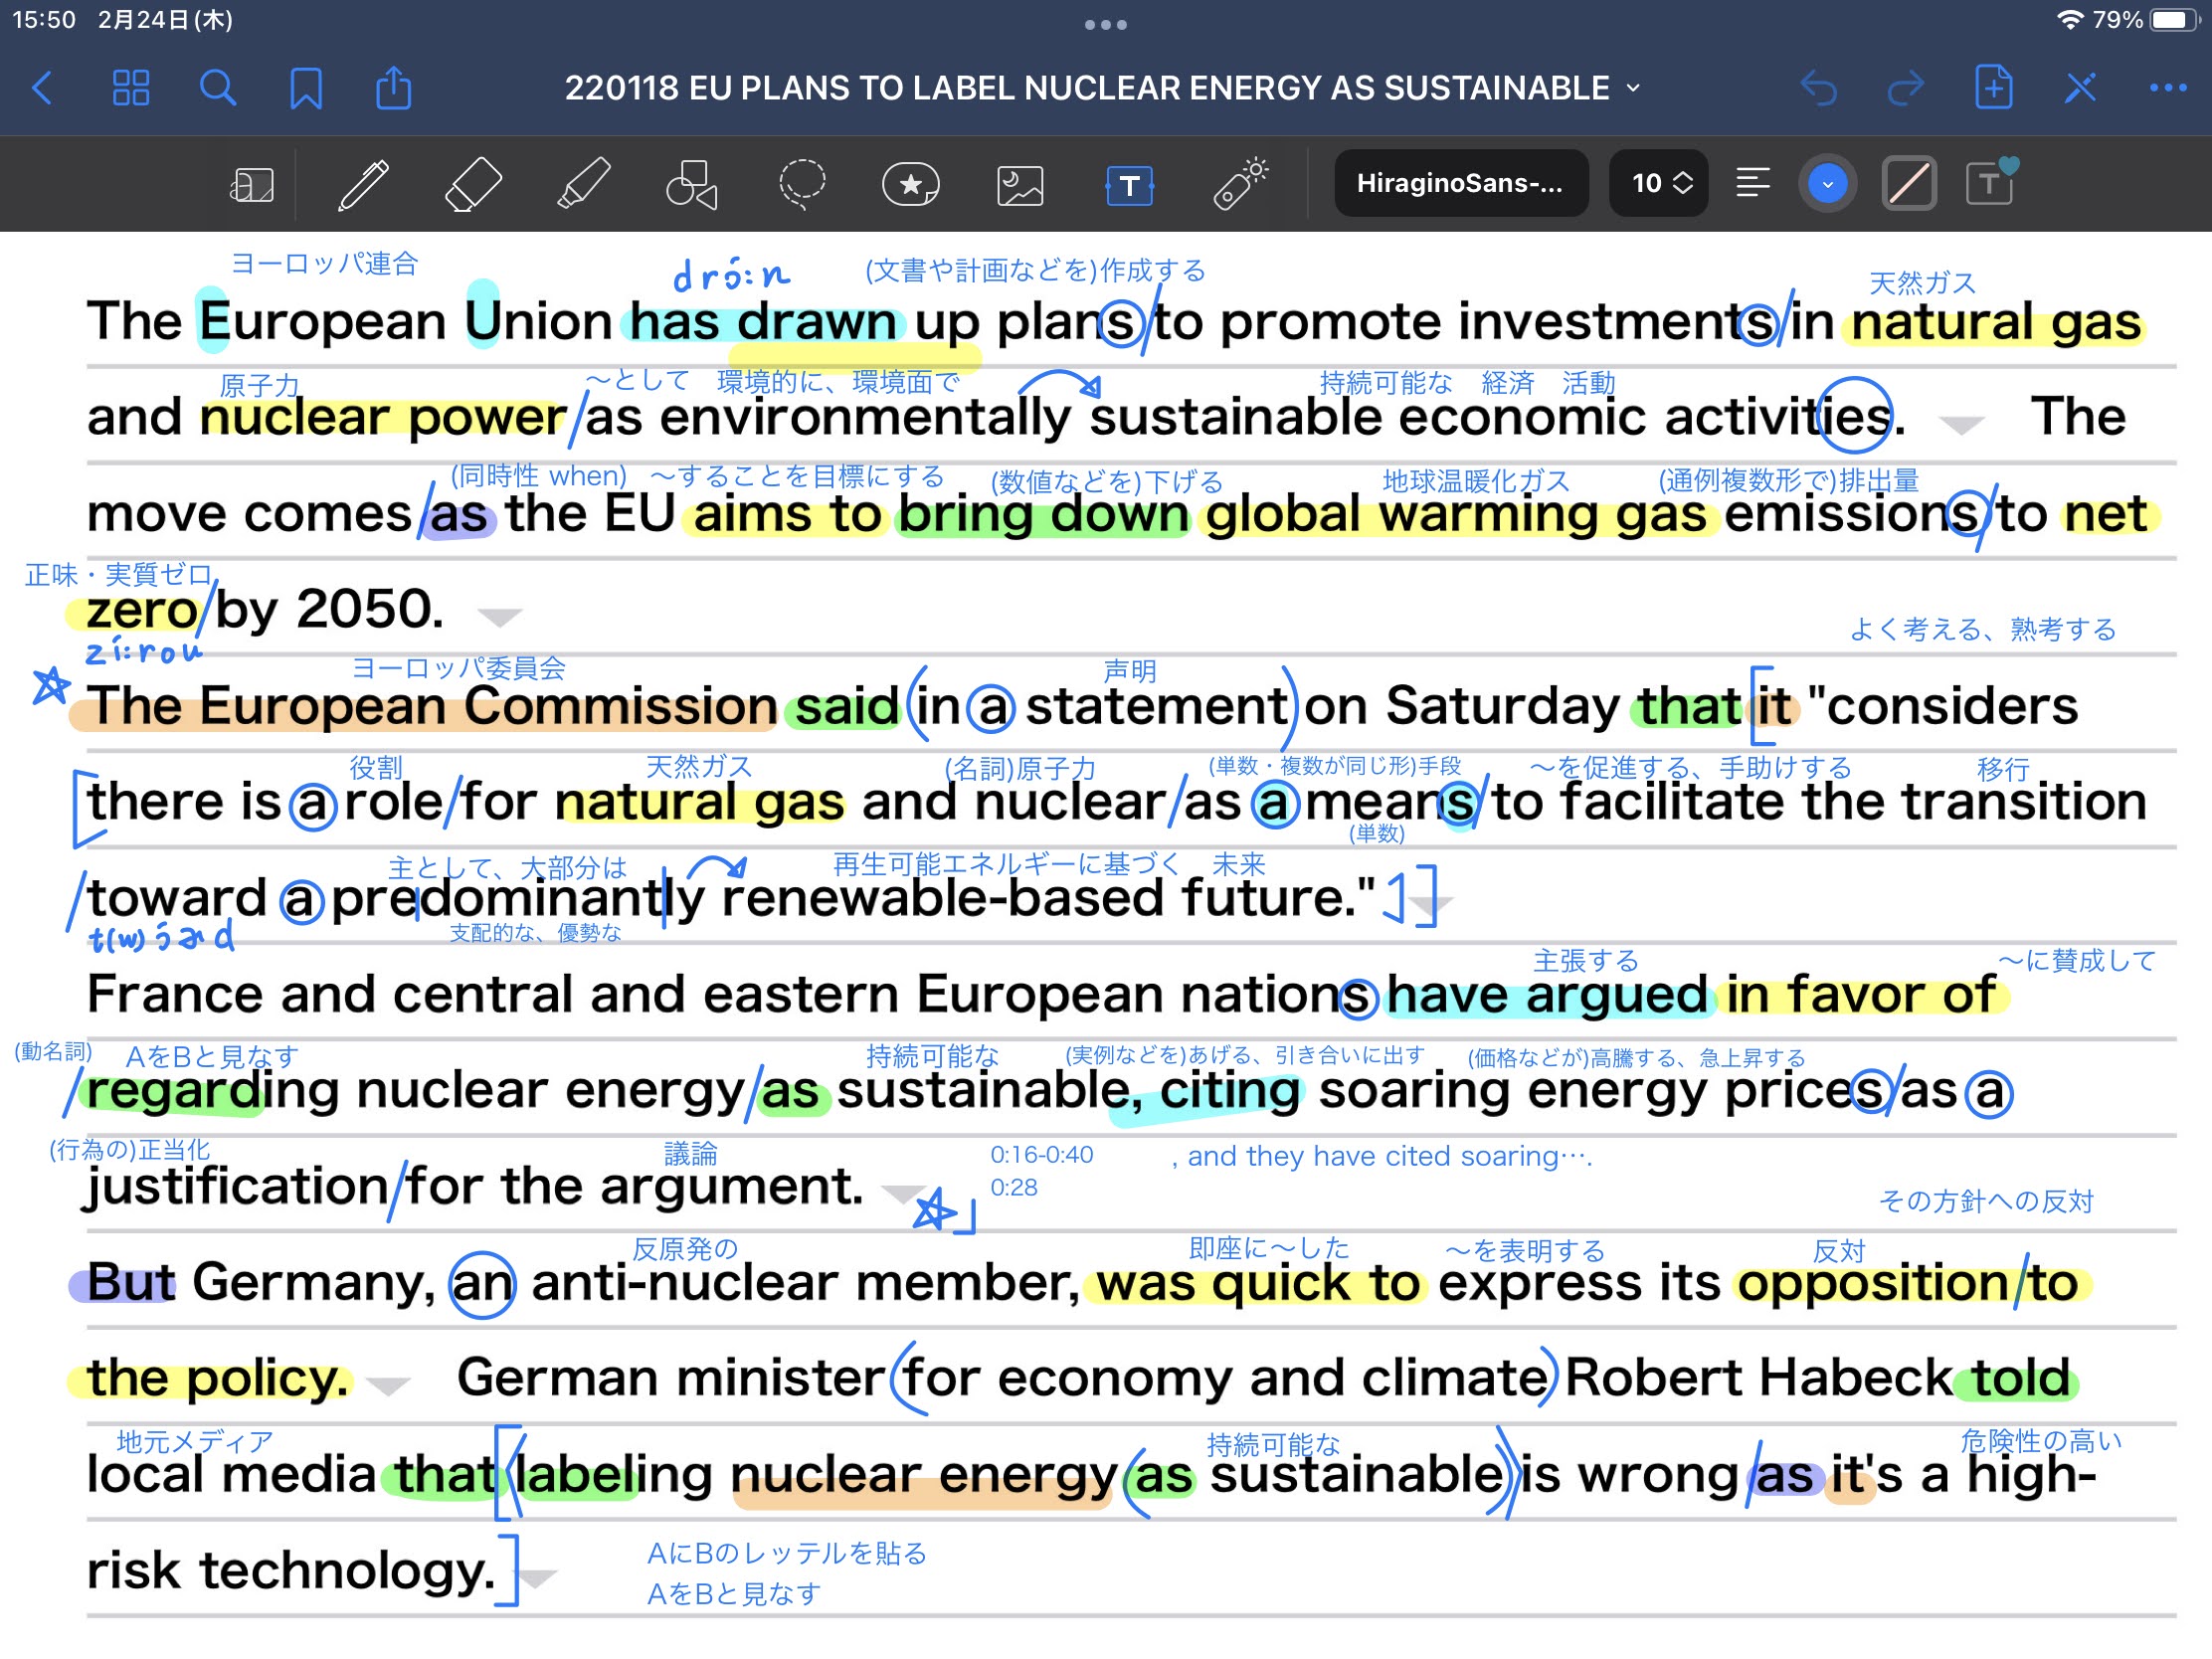 ＥＵ “原発は持続可能な経済活動”　EU PLANS TO LABEL NUCLEAR ENERGY AS SUSTAINABLE